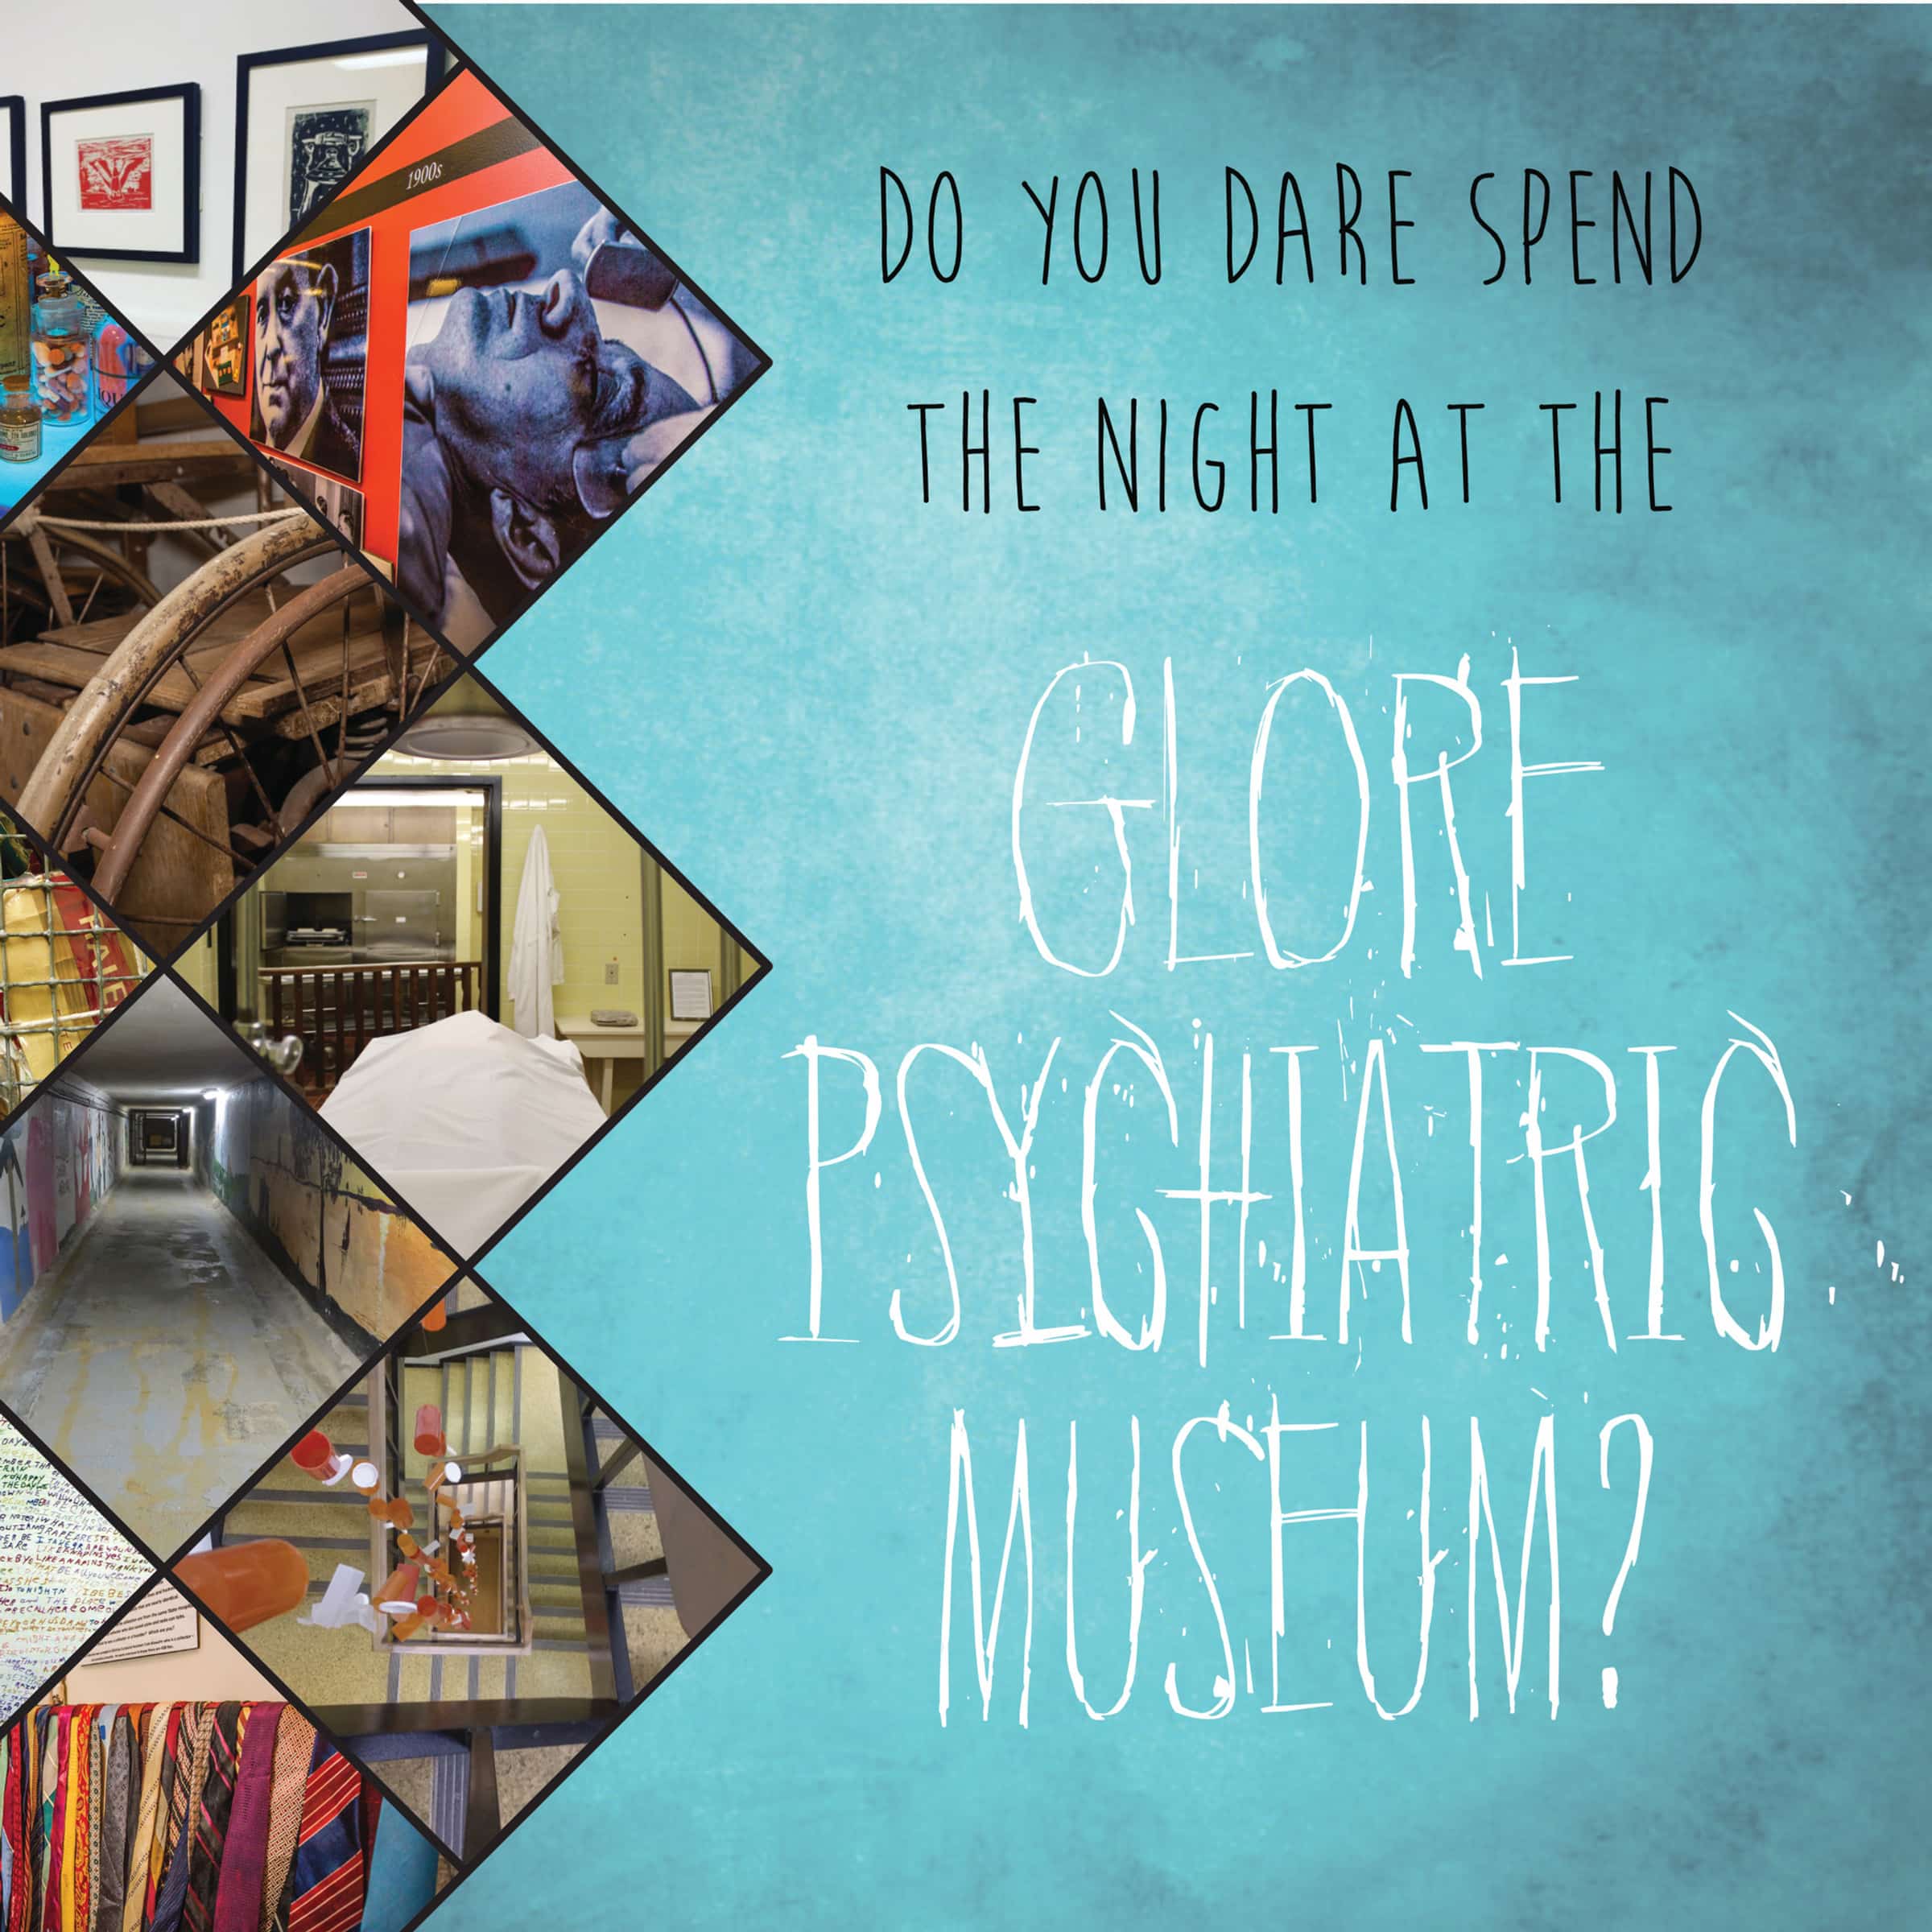 Spend the Night at the Glore Psychiatric Museum